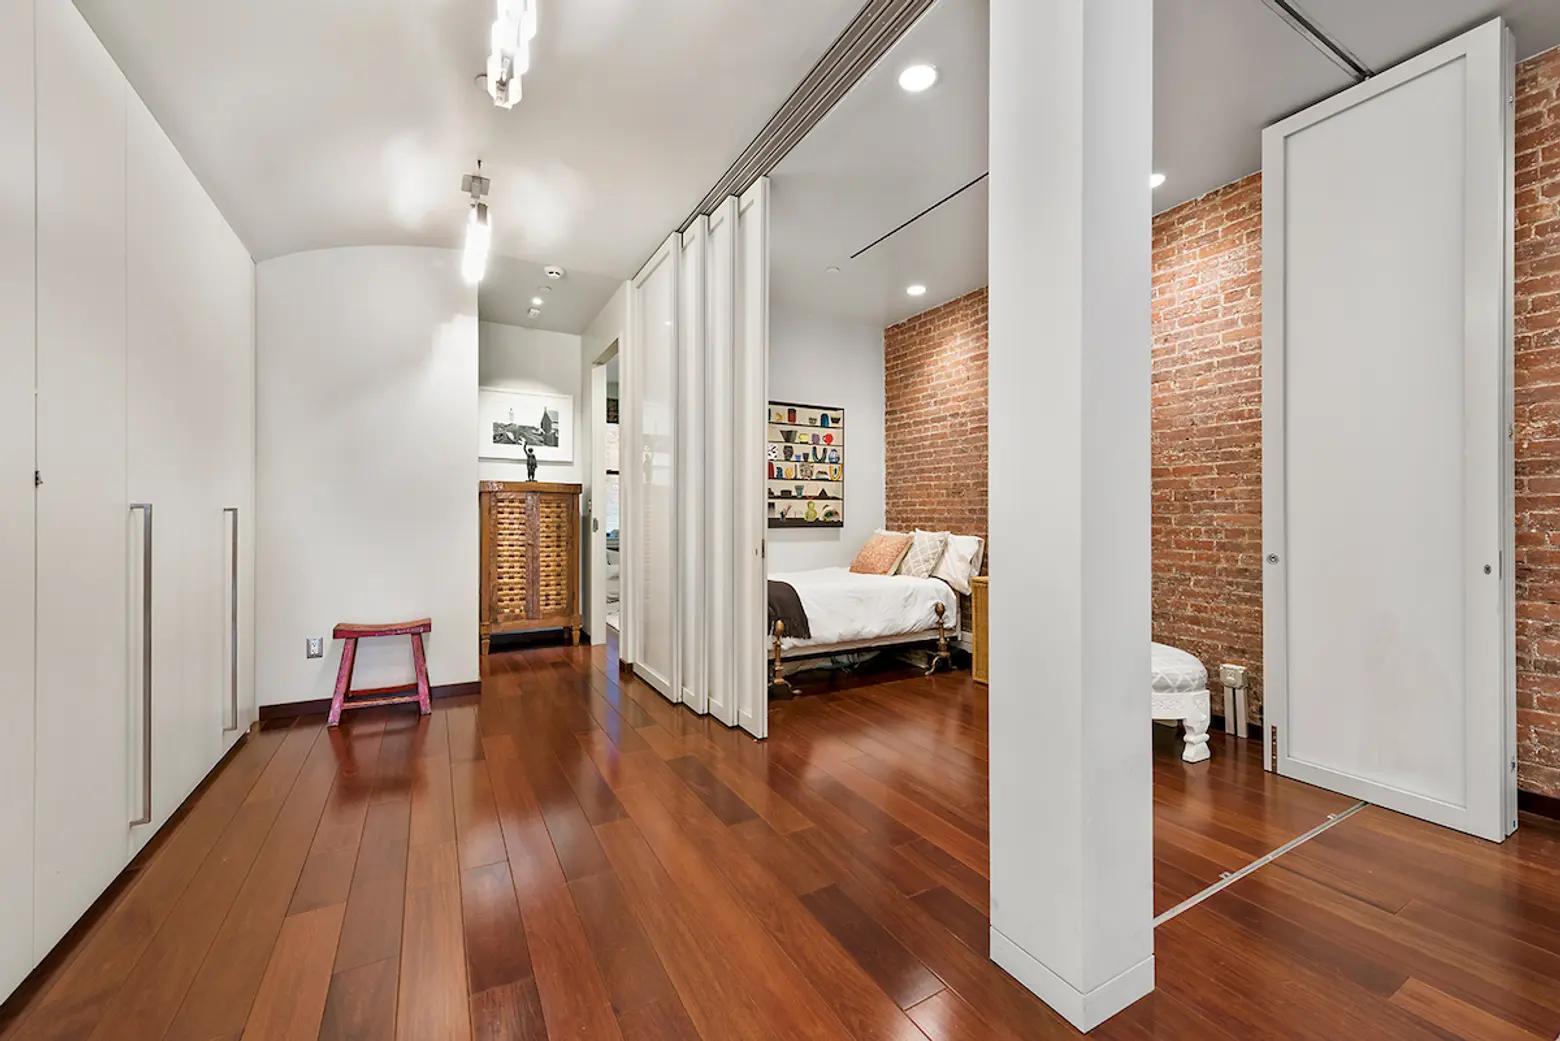 36 North Moore Street, Cool Listings, Tribeca, Lofts, Co-ops for sale, Manhattan lofts for sale